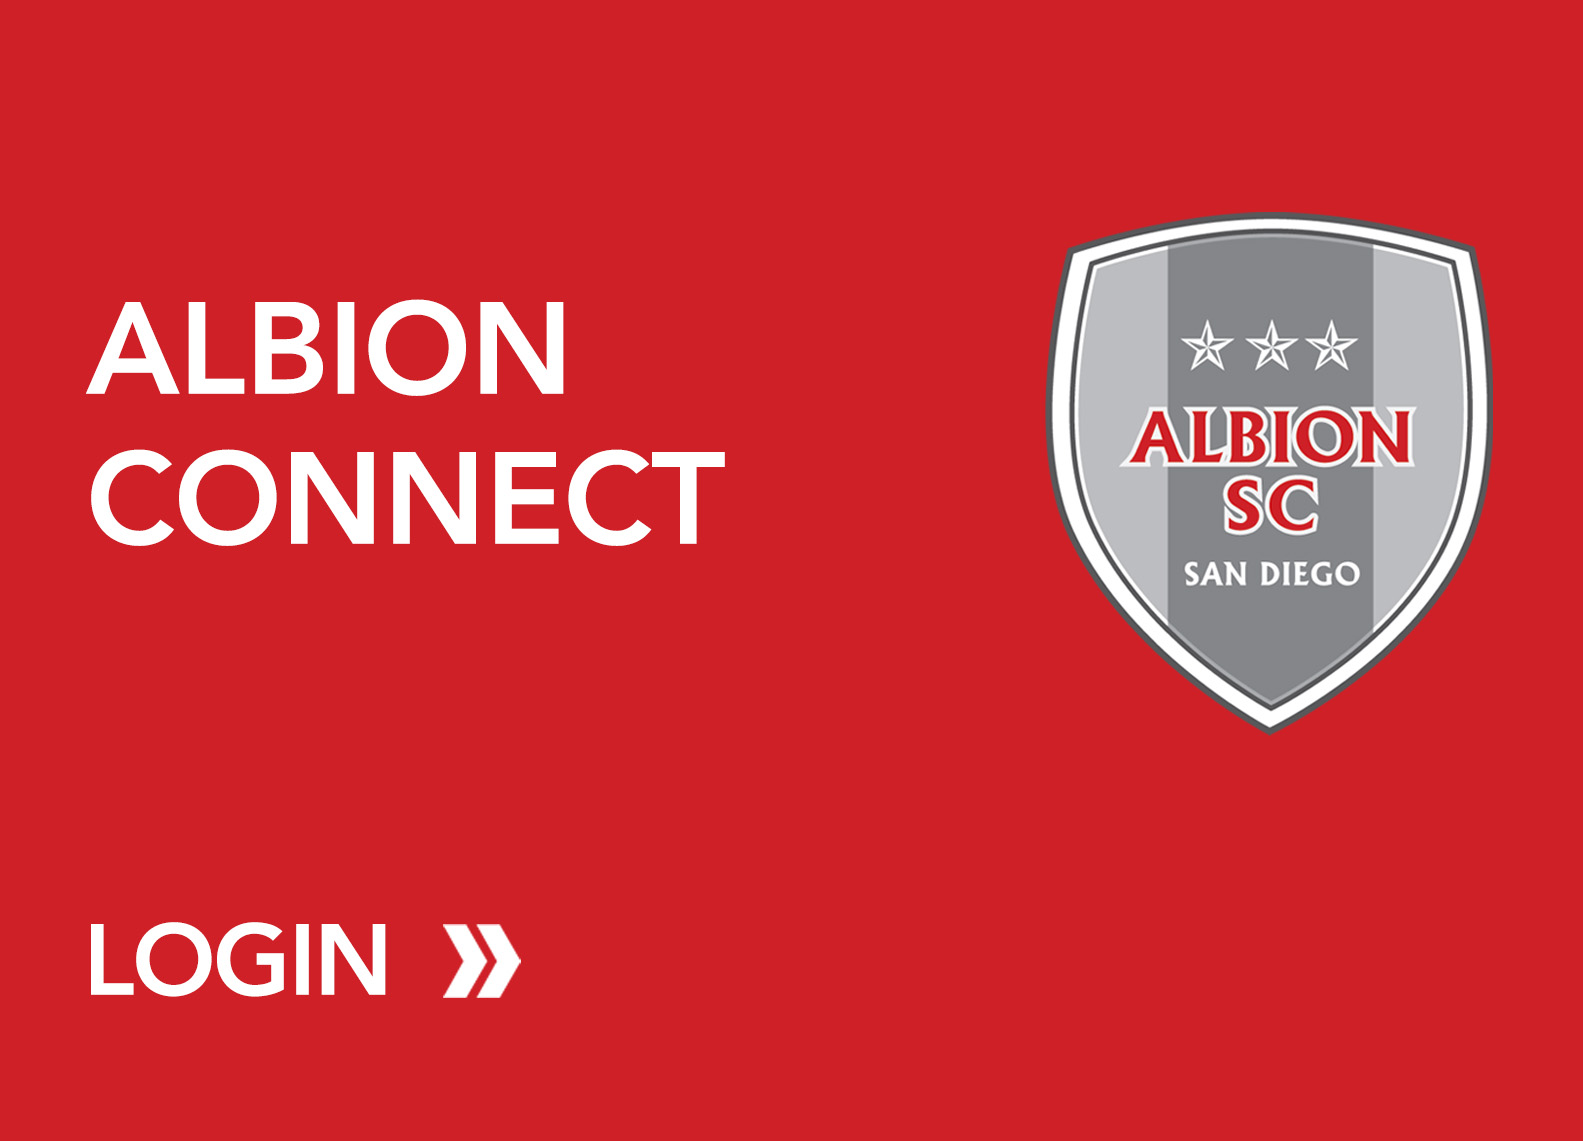 Login to ALBION Connect